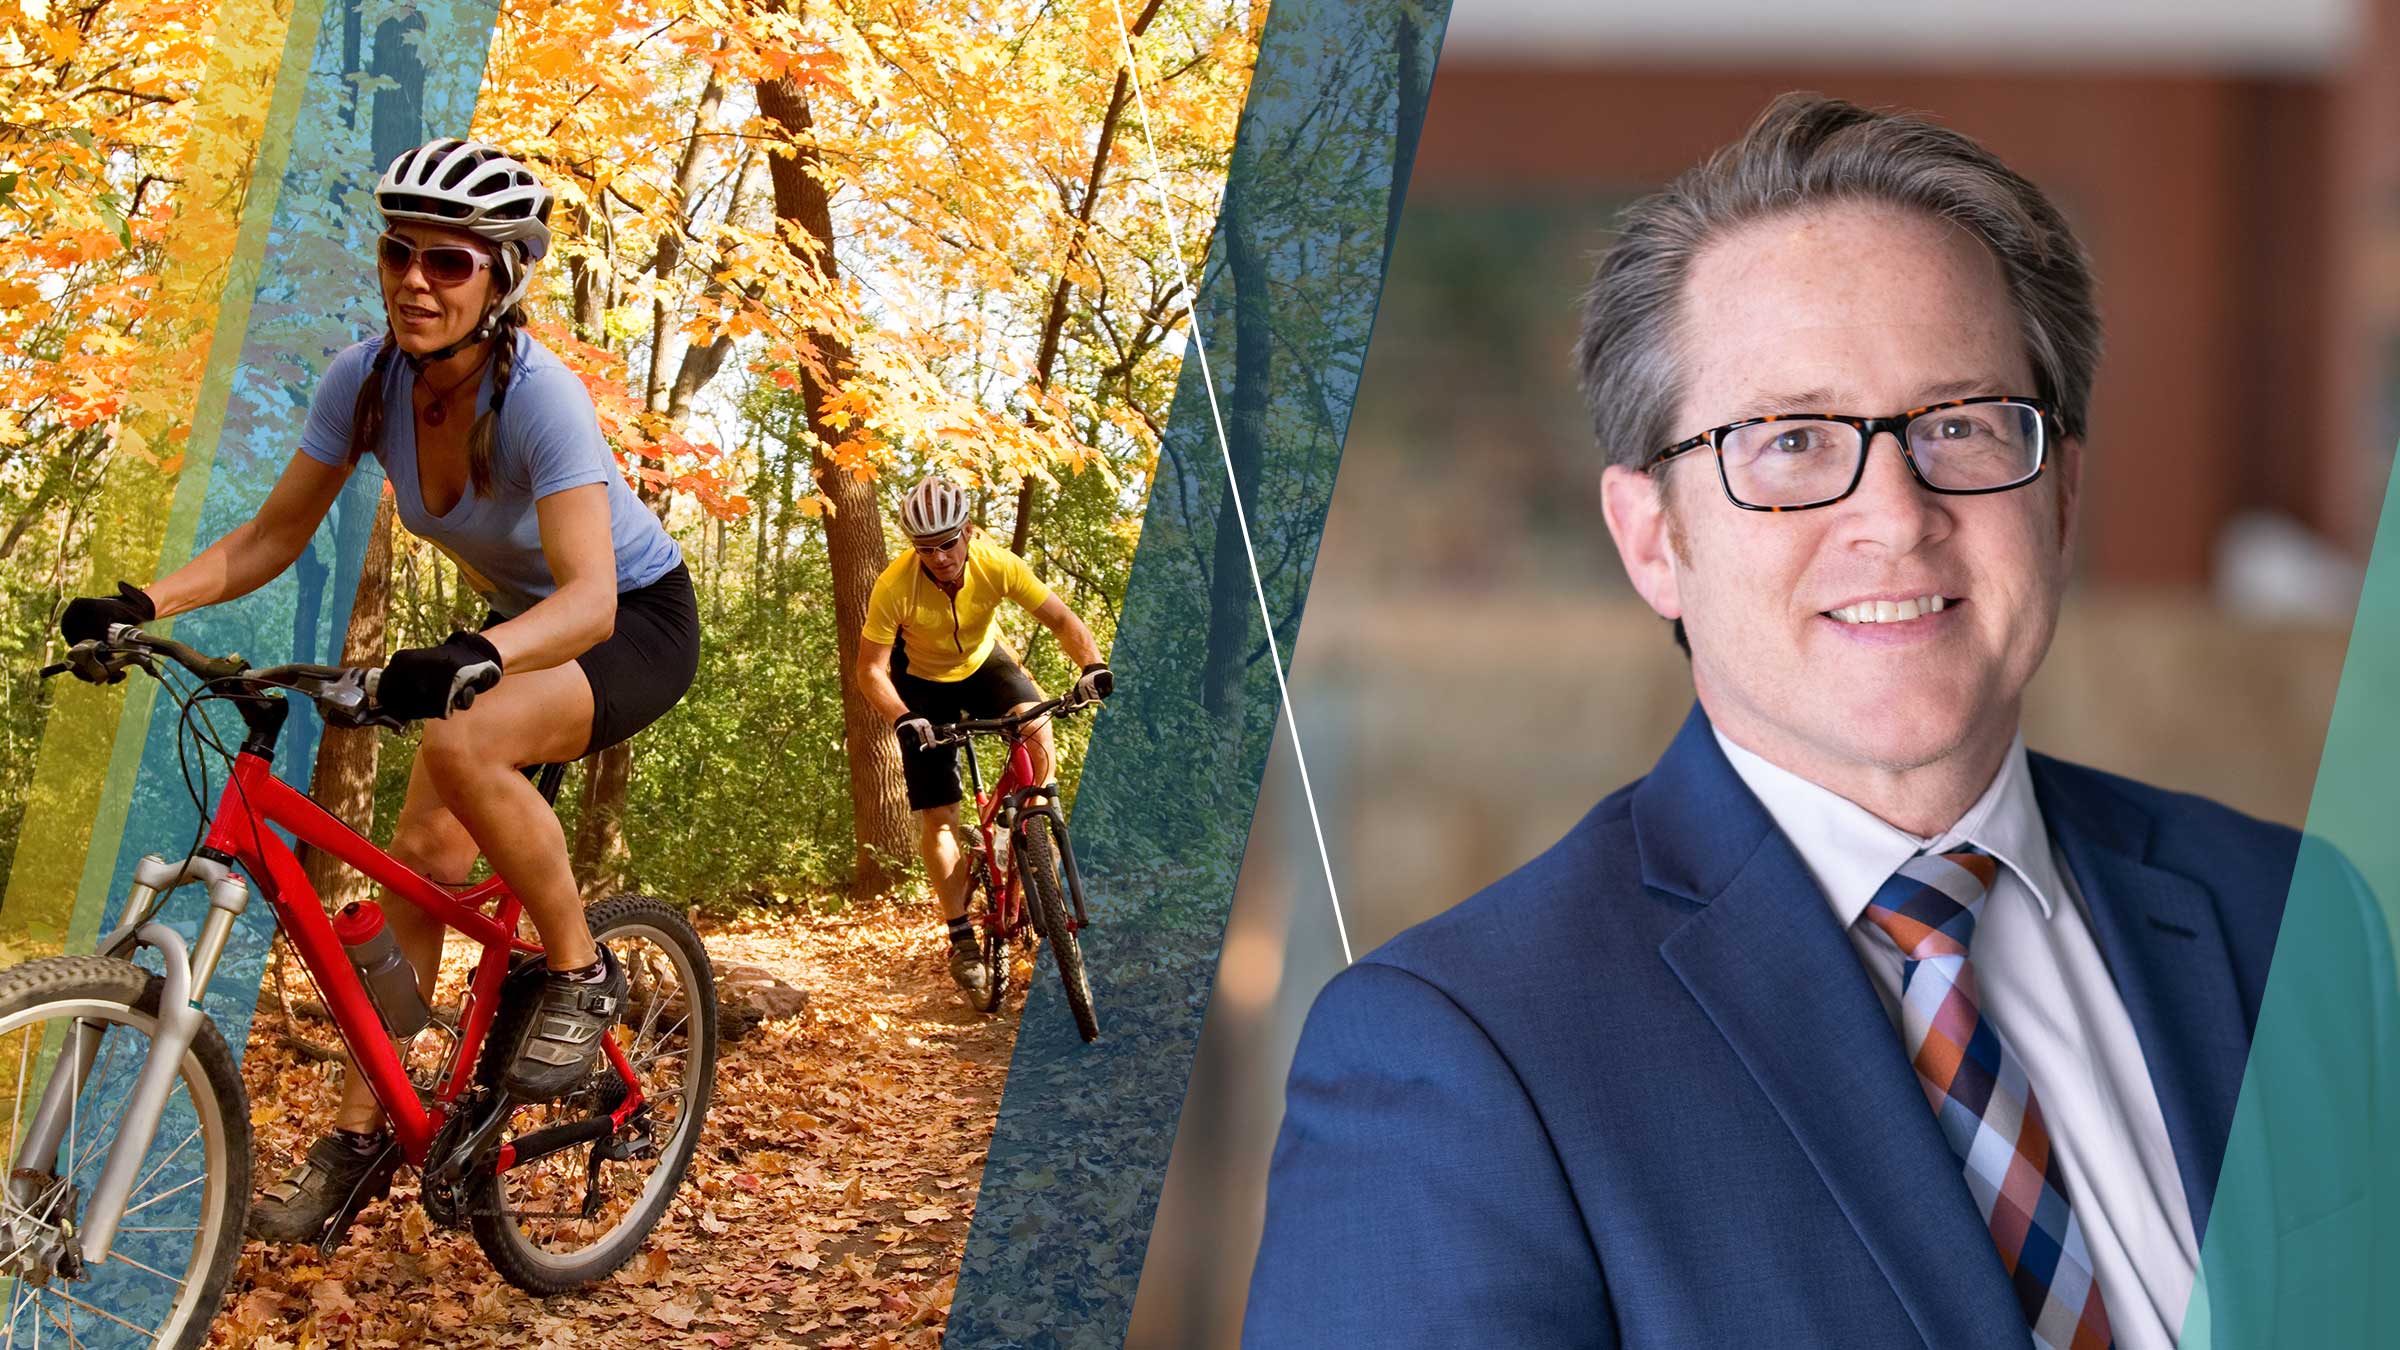 Side-by-side image of cyclists on a trail on the left and Ron Wirtz on the right